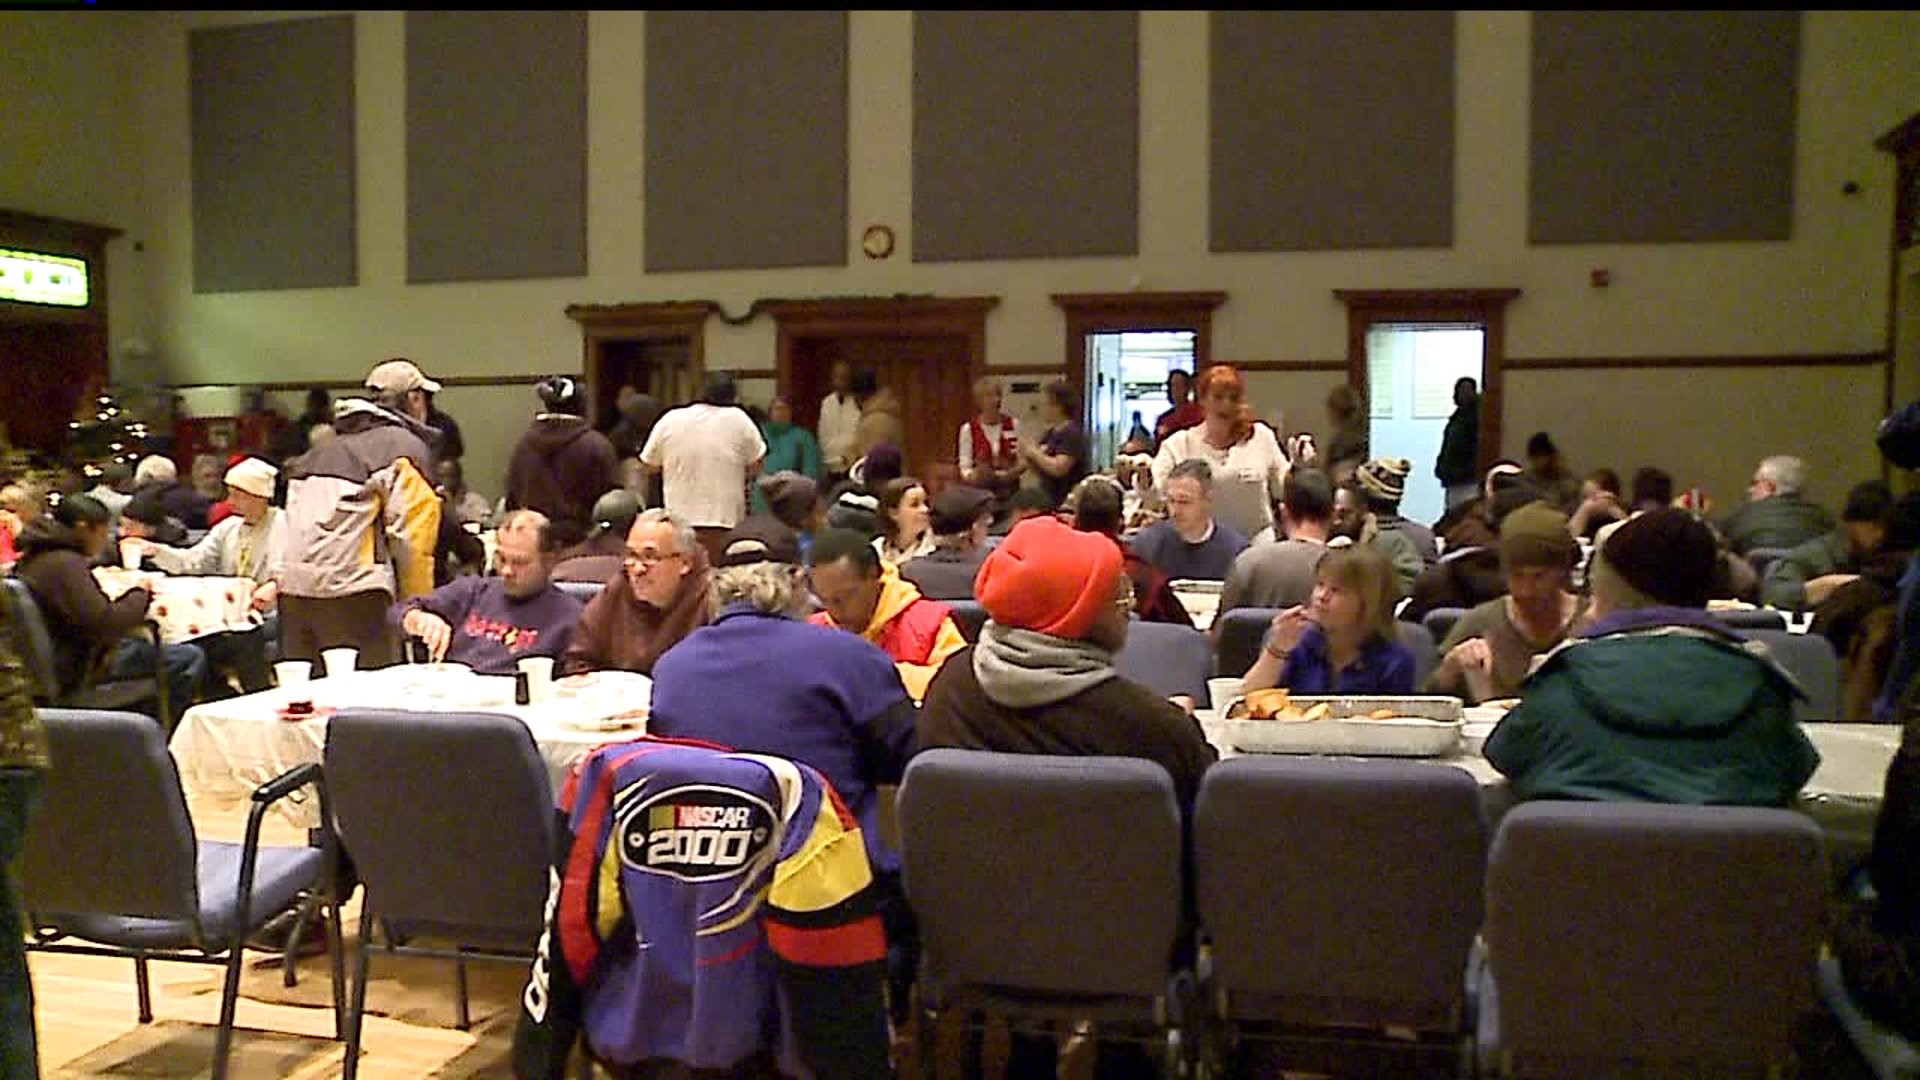 Bethesda Mission expects to serve more than 200 people Thanksgiving dinner